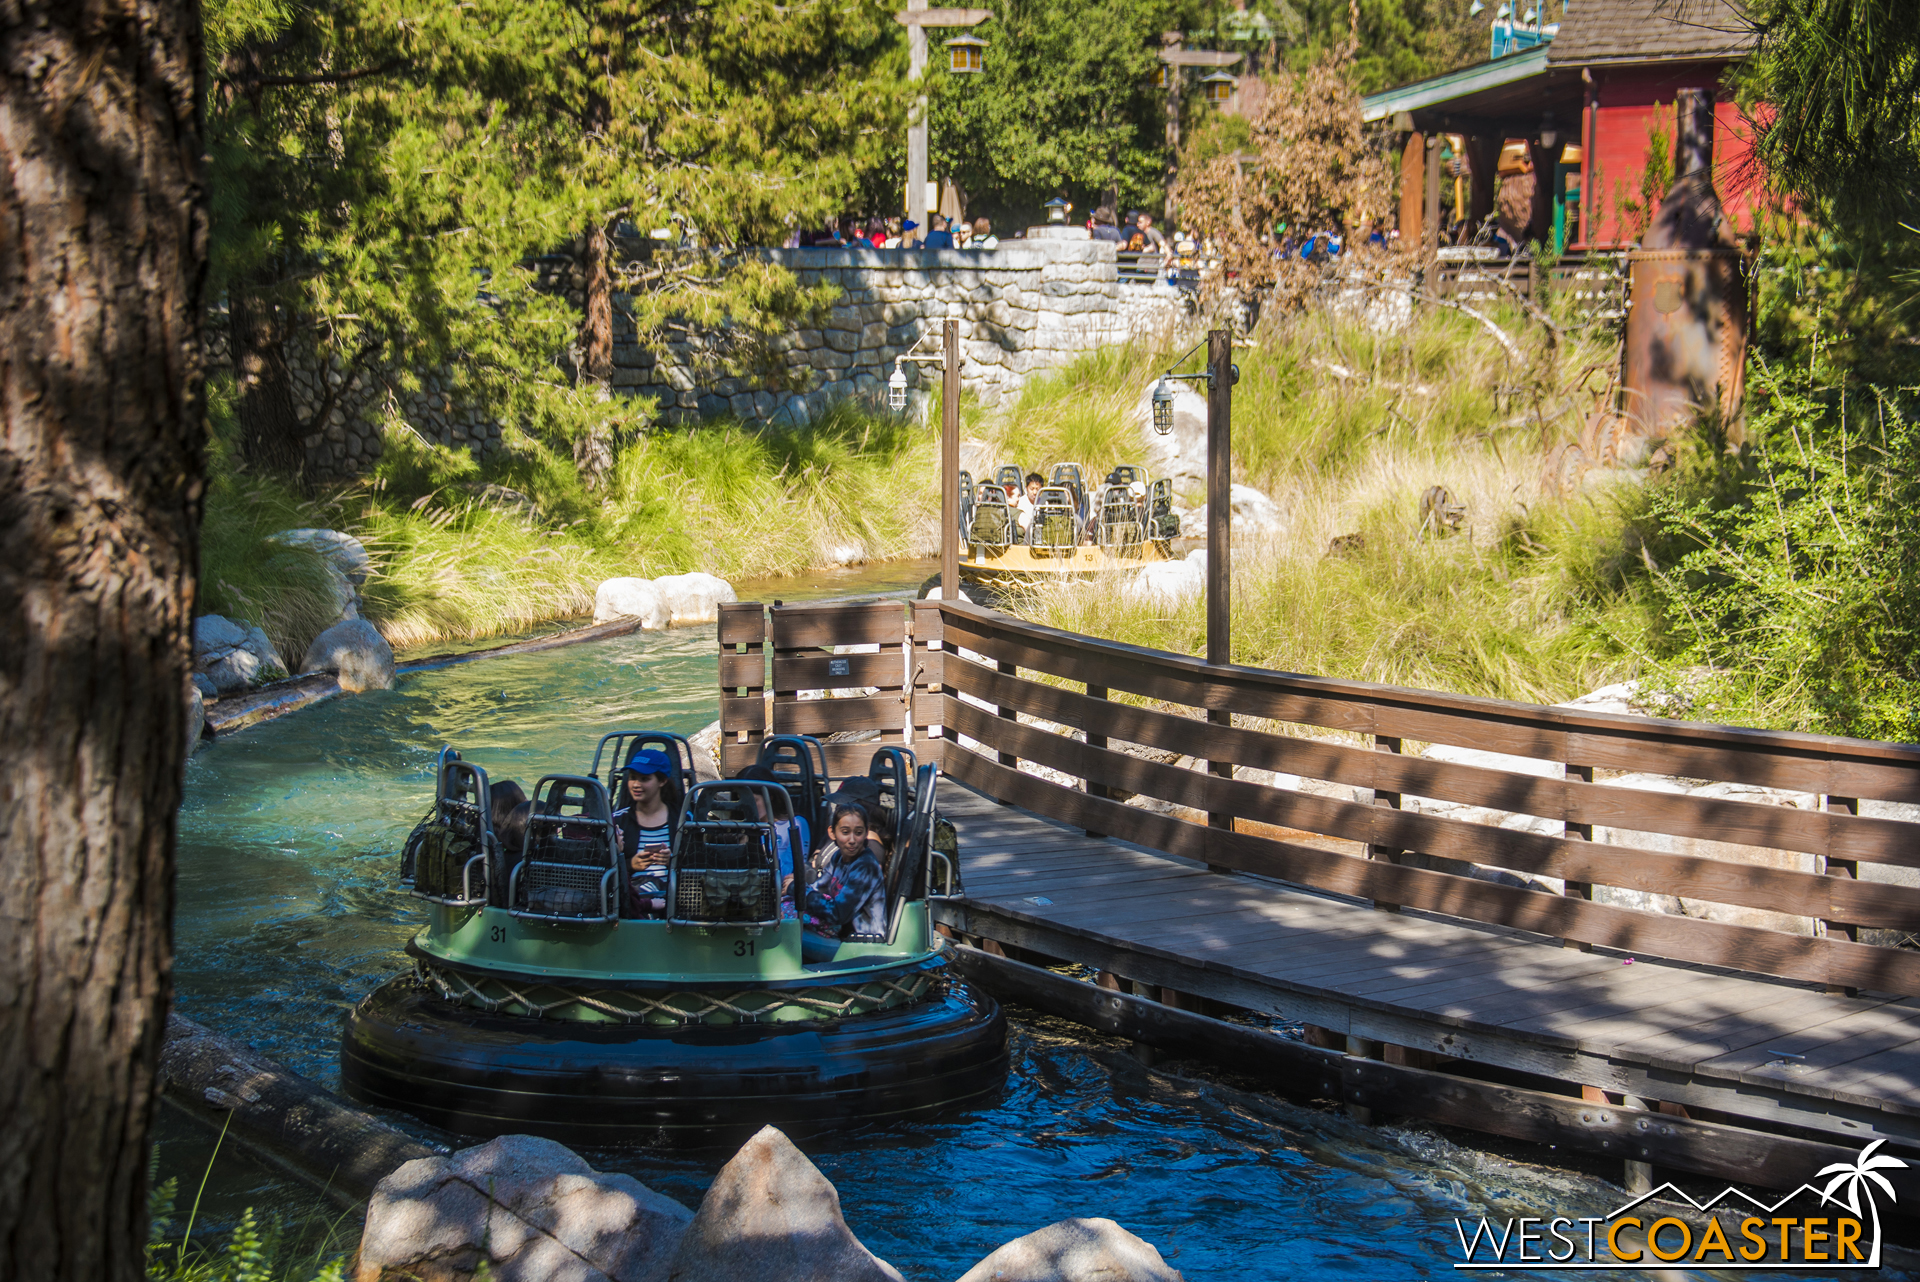  In fact, it's the only real water ride open at the Resort right now (excluding the Rivers of America attractions). 